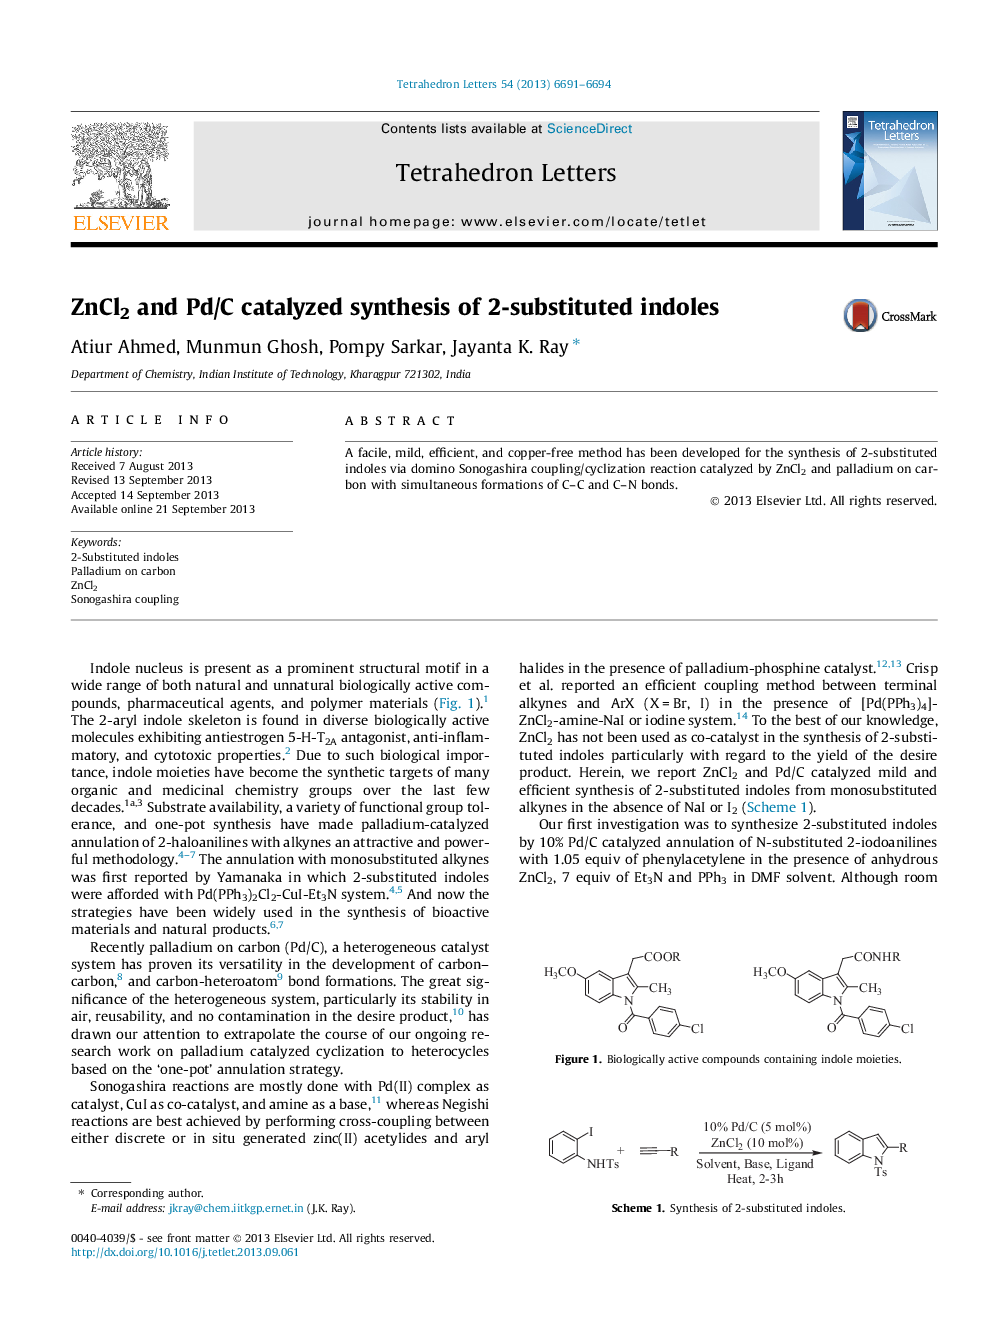 ZnCl2 and Pd/C catalyzed synthesis of 2-substituted indoles